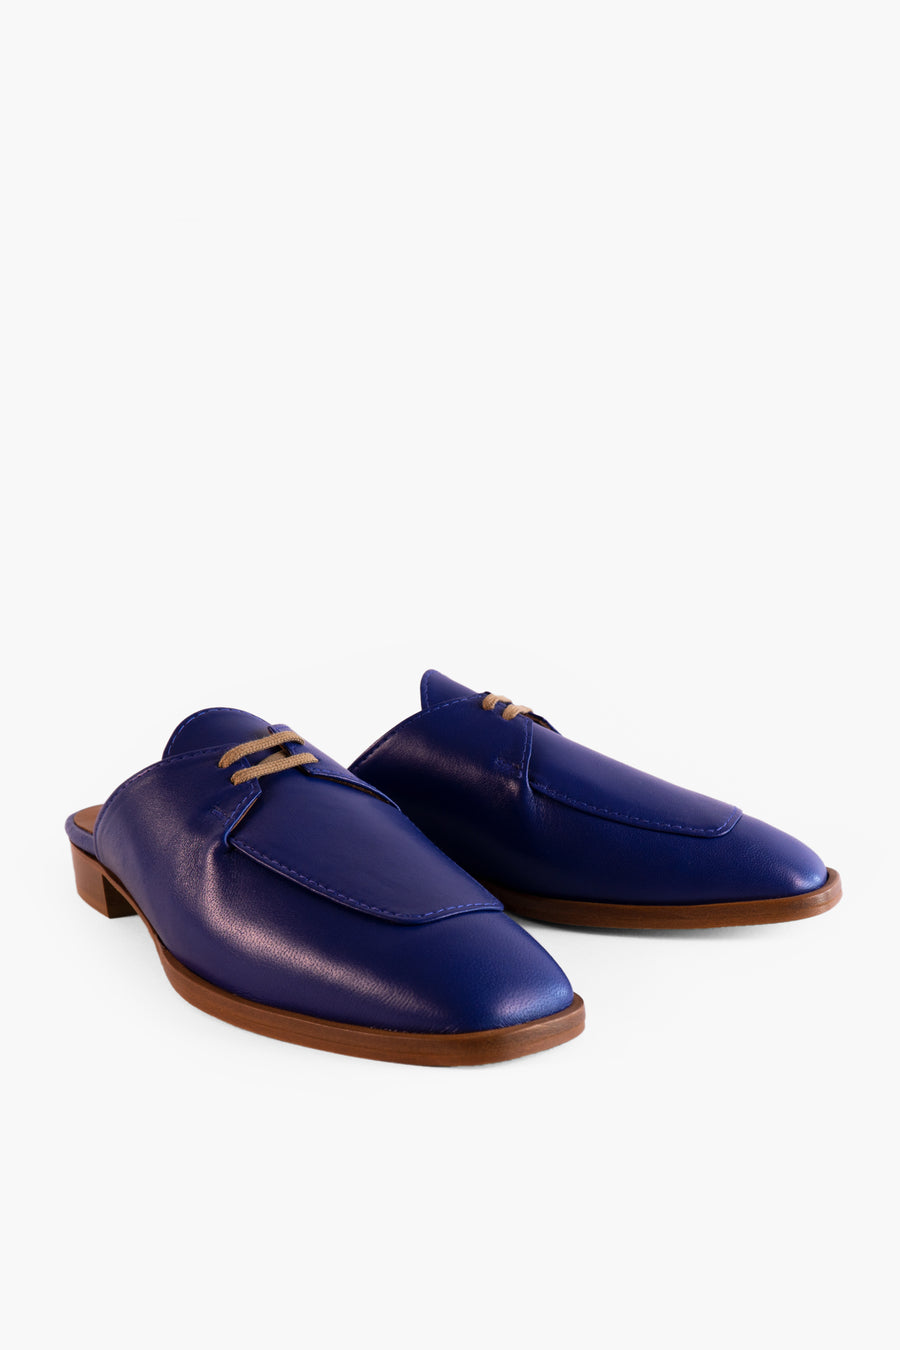 TINKI open back Loafers | Made in Germany